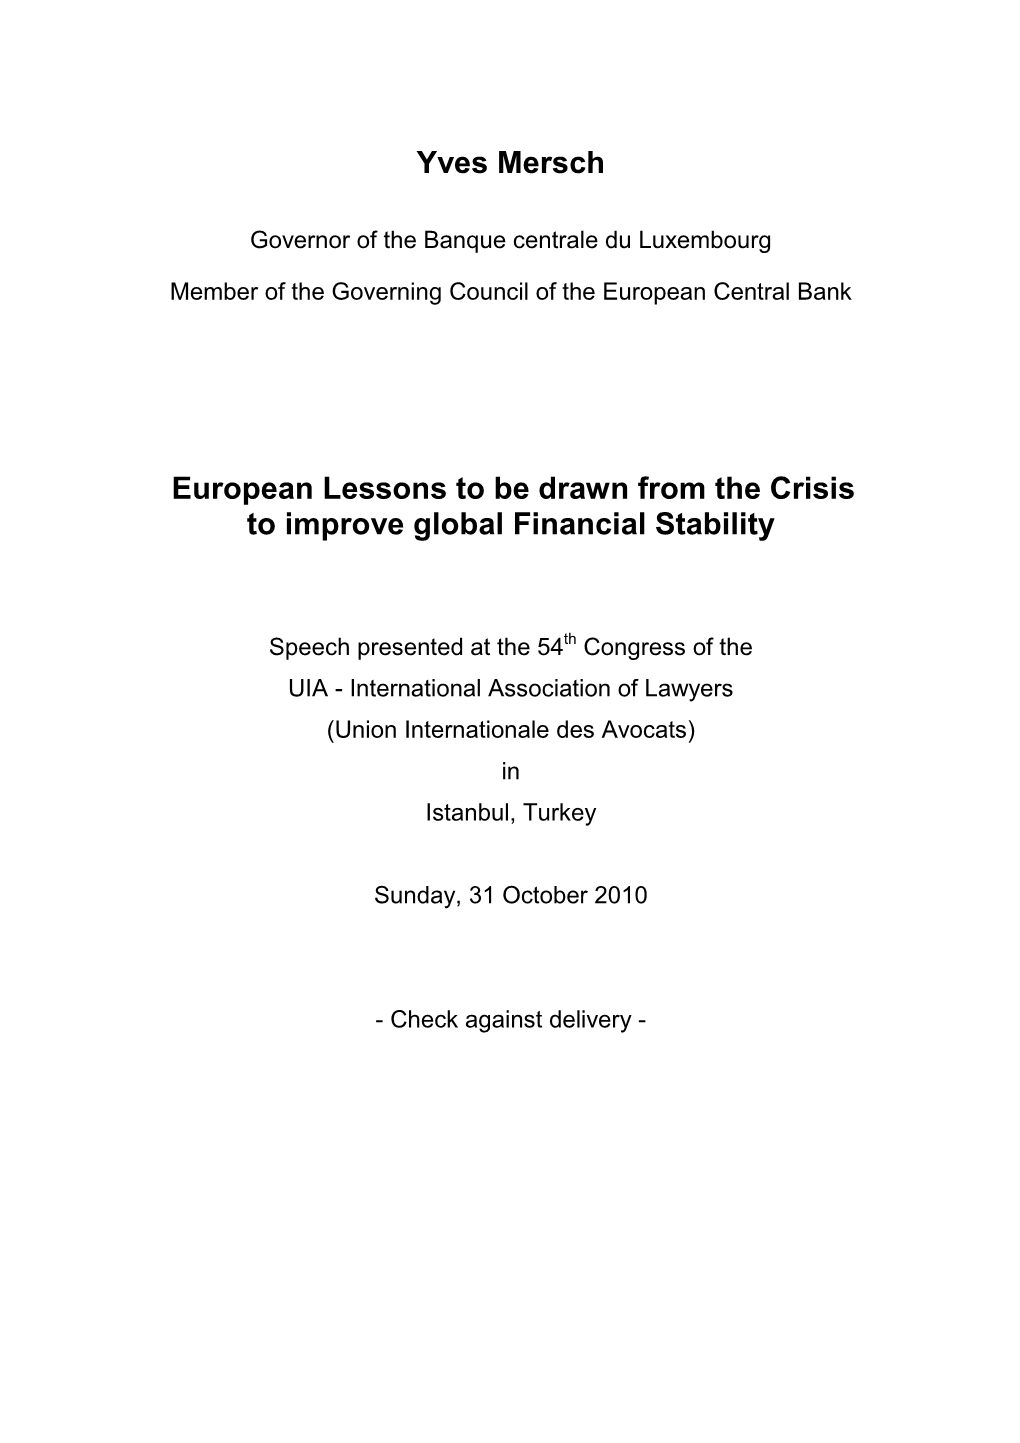 Yves Mersch European Lessons to Be Drawn from the Crisis to Improve